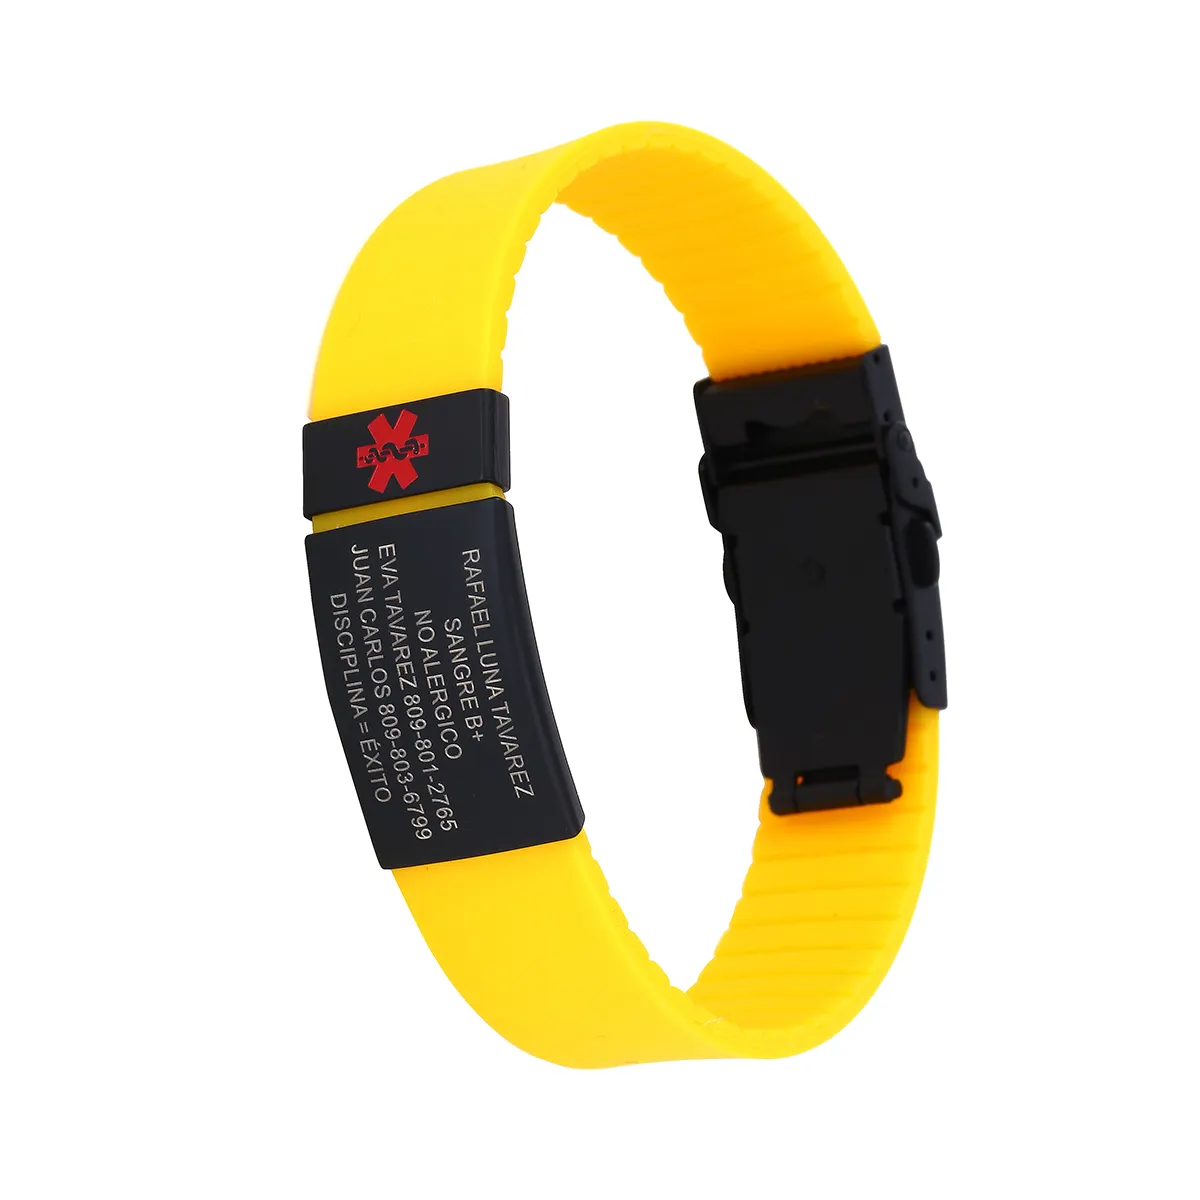 Custom sports rubber silicone bracelets men make your own rubber wristbands with message or logo personalized wrist bands